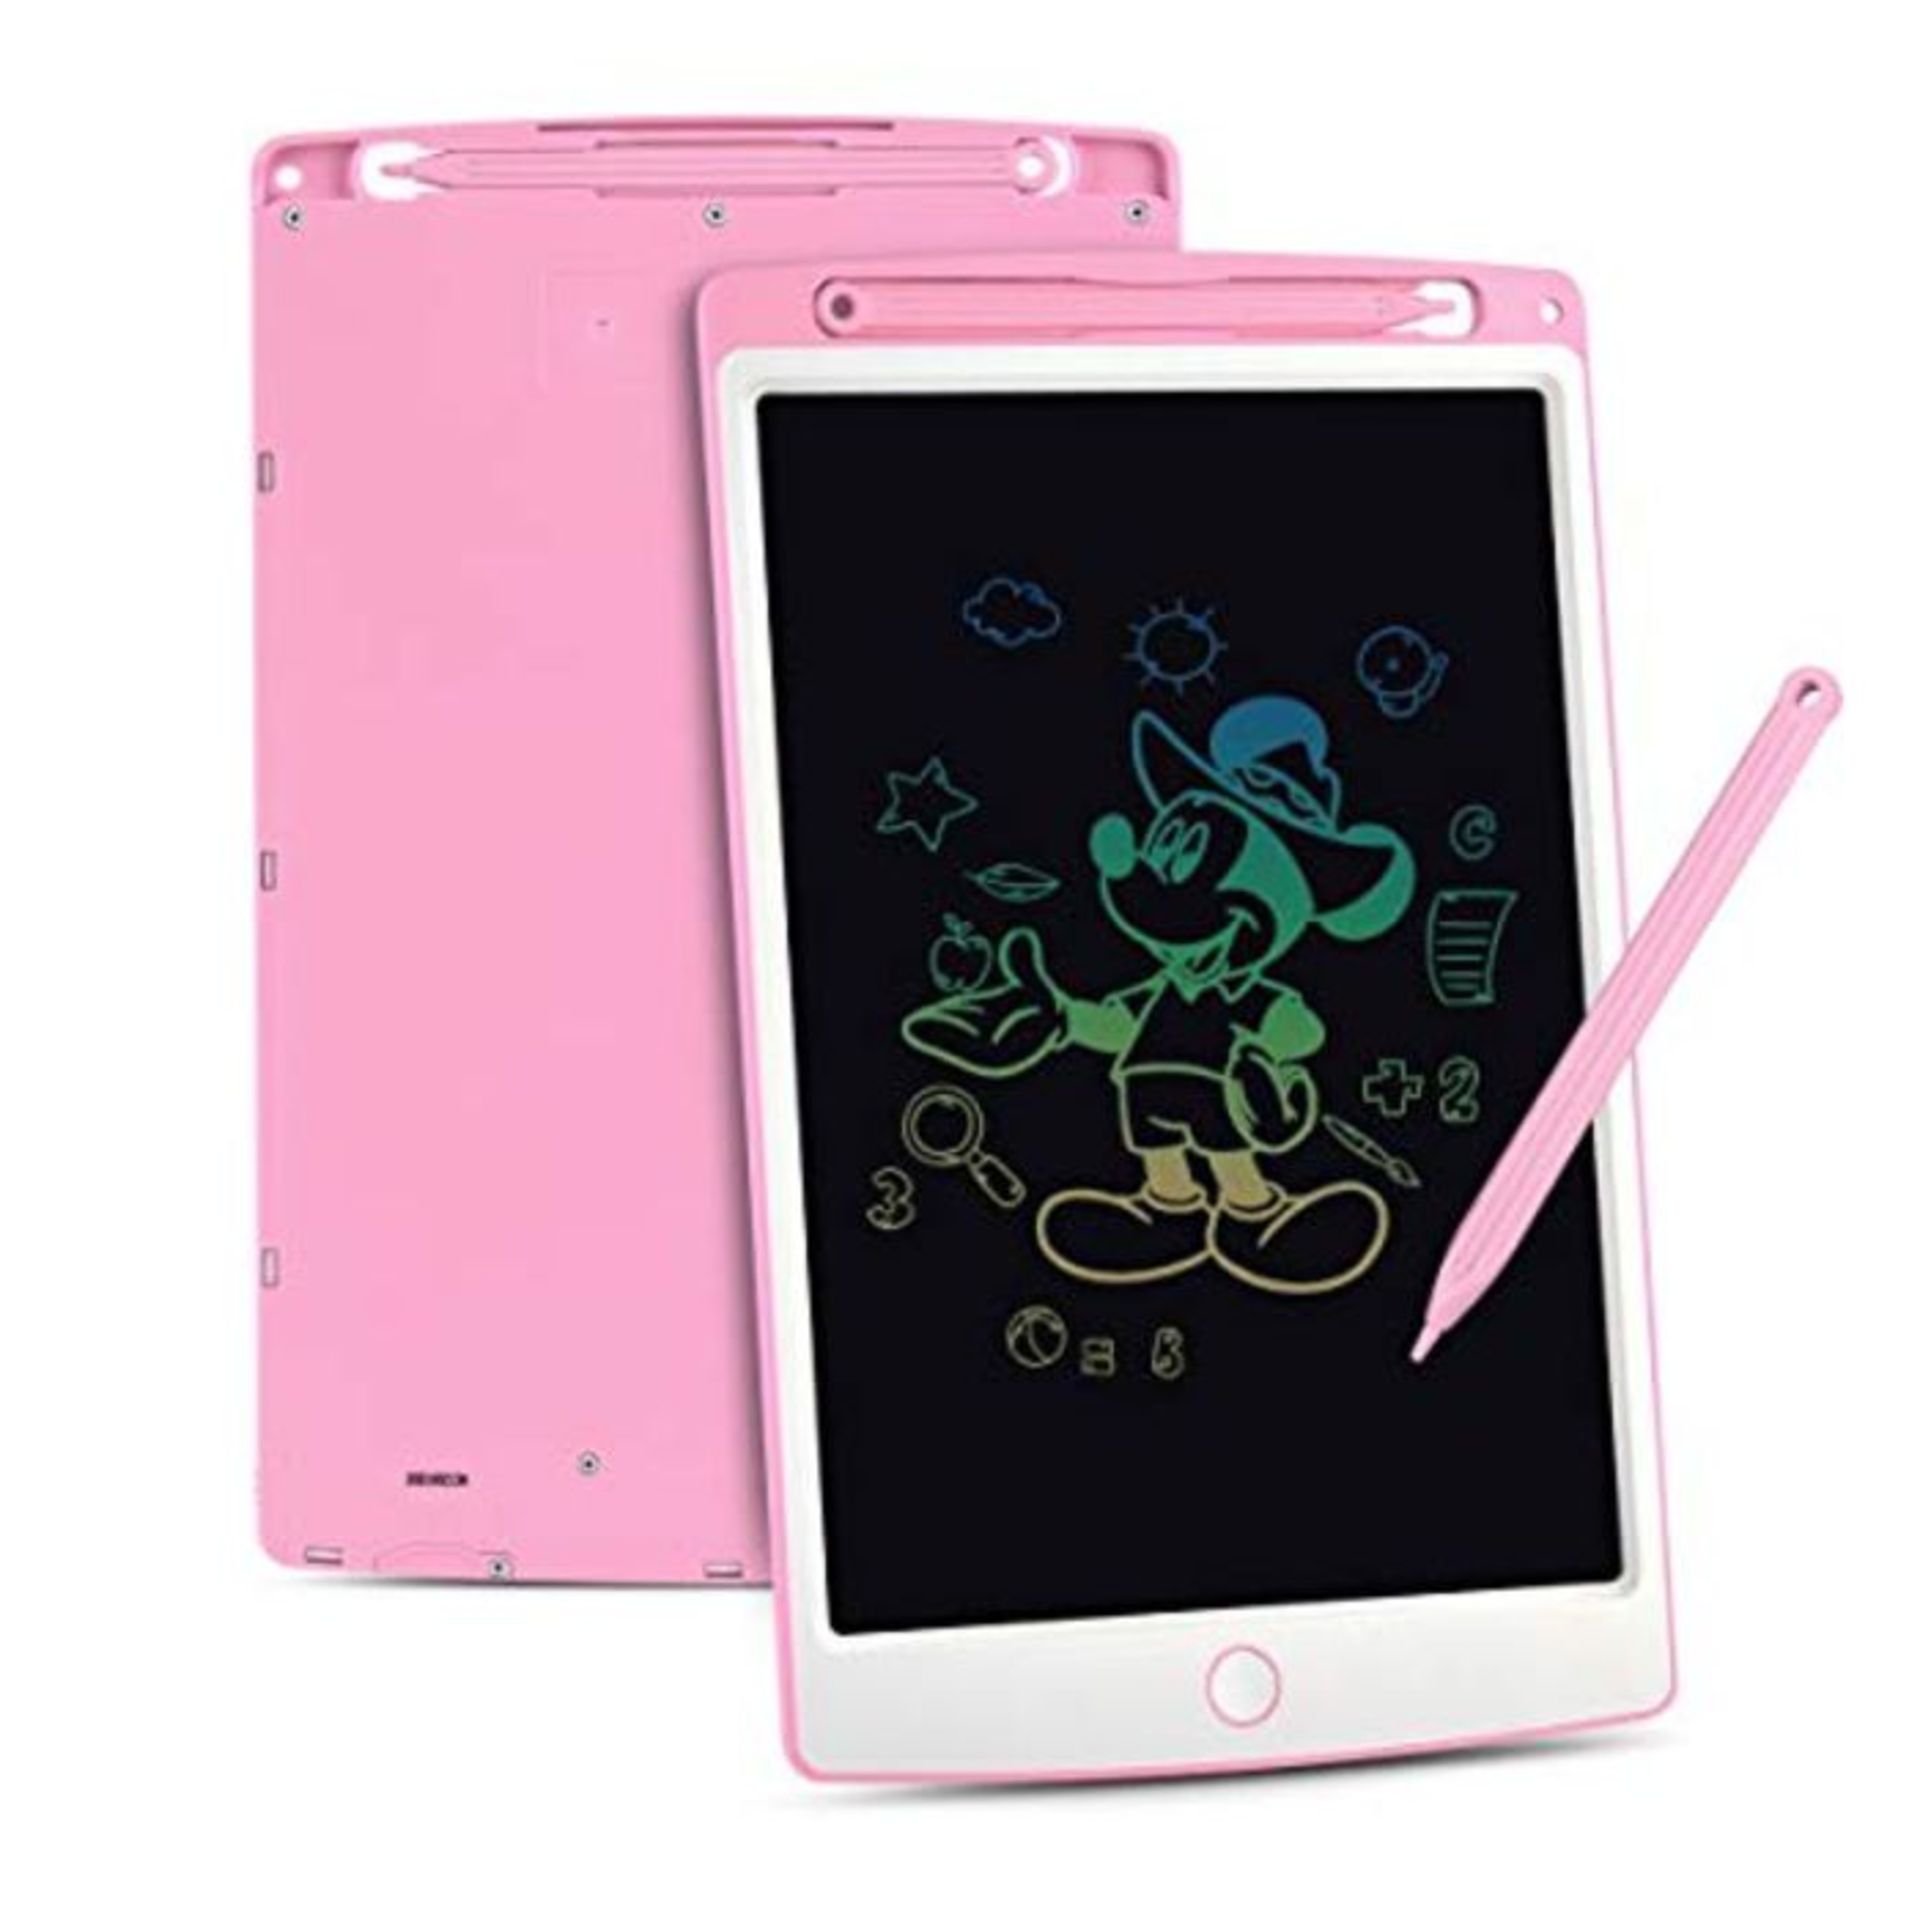 LCD Writing Tablet, Colorful Screen Digital eWriter Electronic Graphics Tablet Portabl